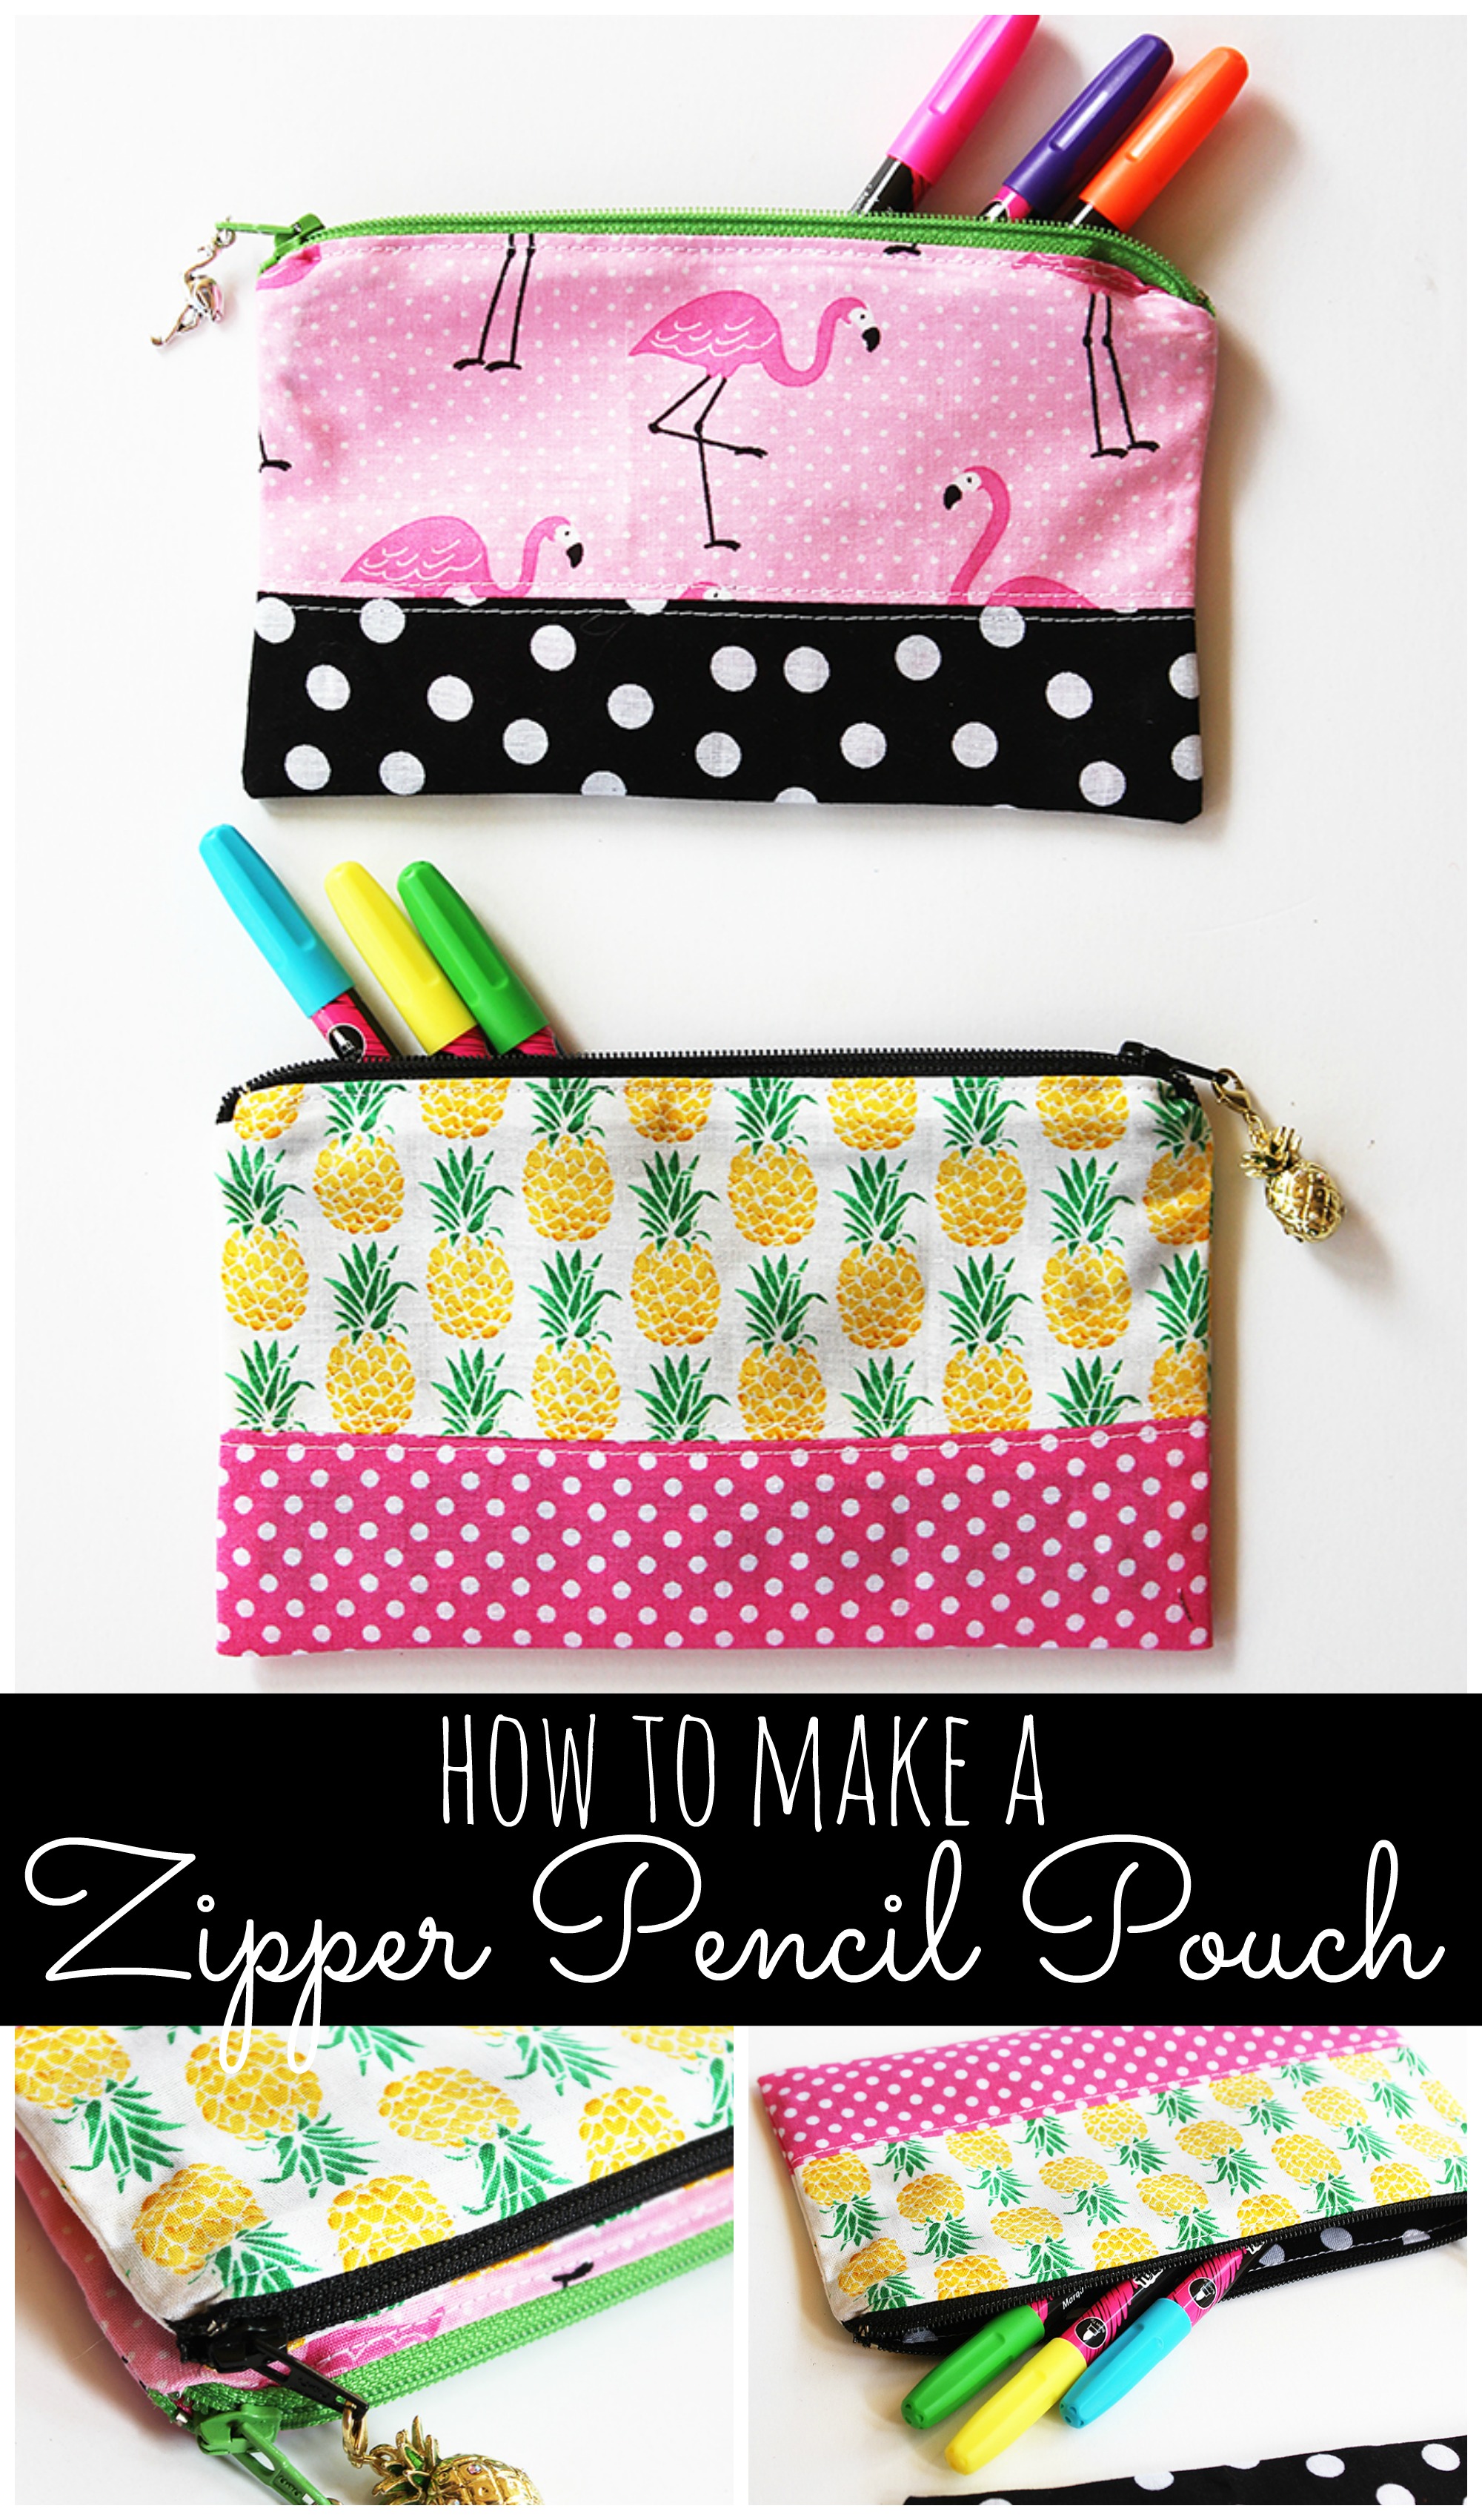 Zipper Pencil Pouch Sewing Tutorial - Positively Splendid {Crafts, Sewing,  Recipes and Home Decor}